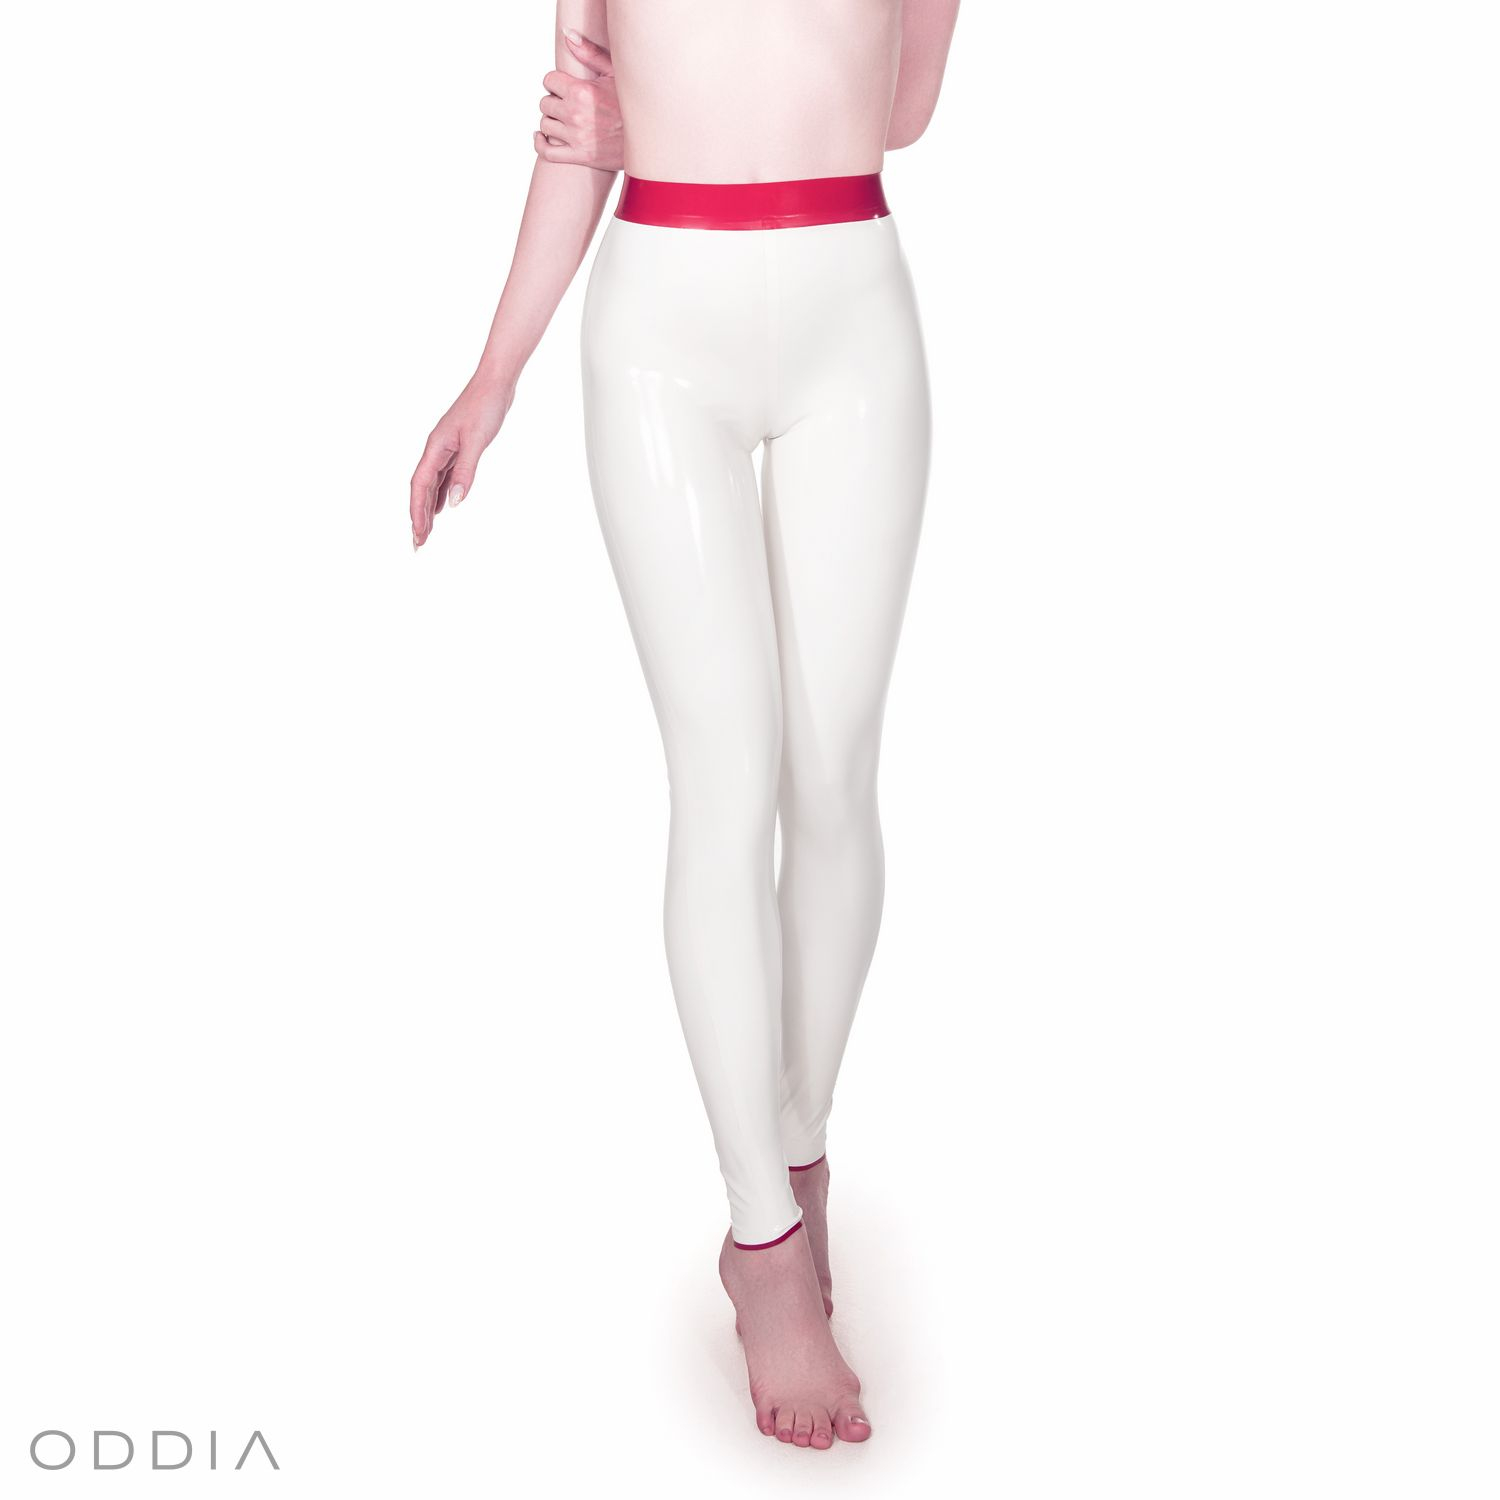 White latex leggings with a red contrasting waistband